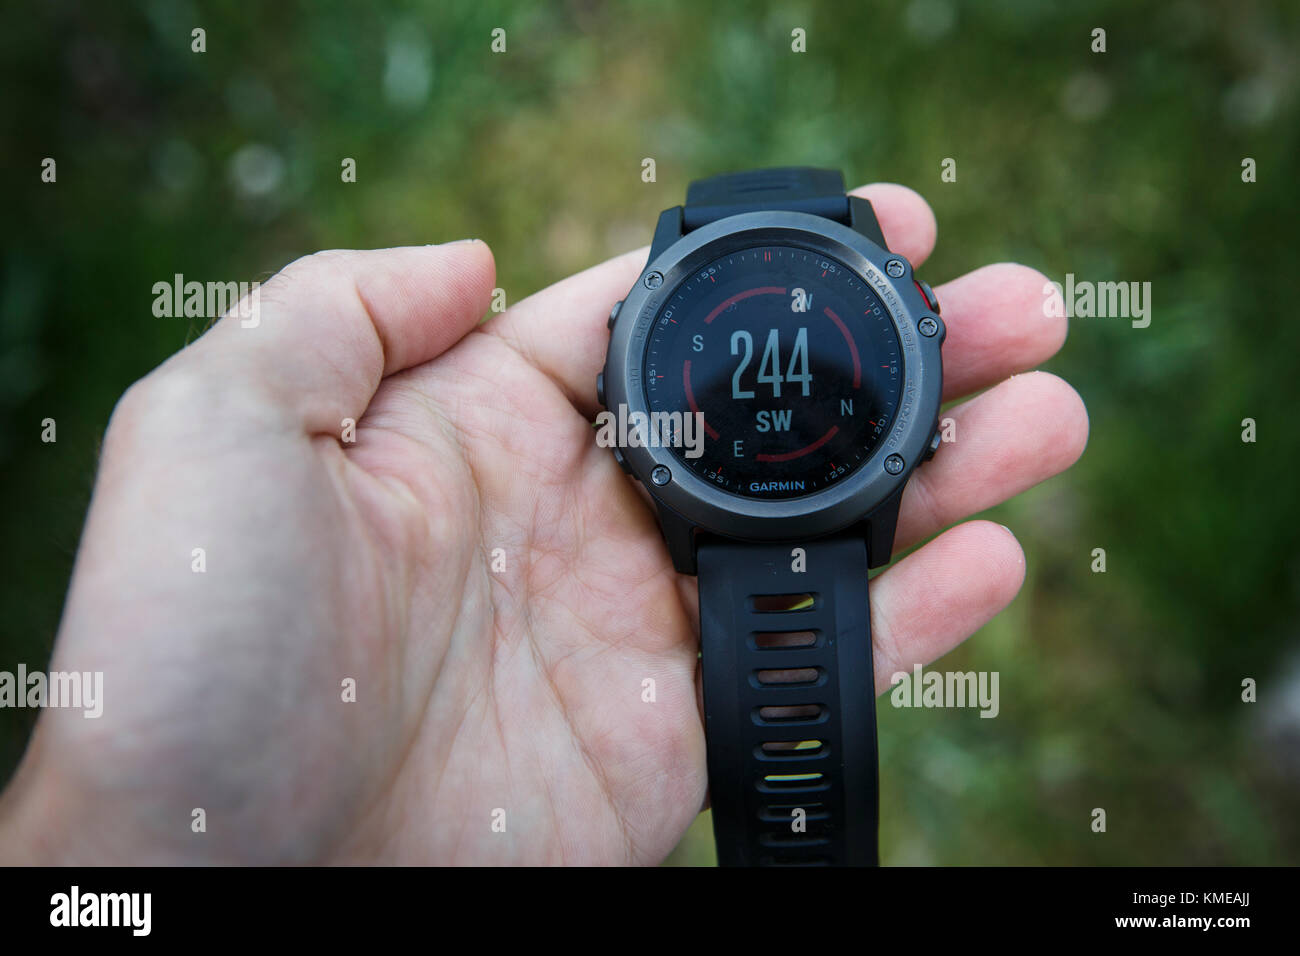 Hand of person holding wristwatch with GPS compass, Colorado, USA Stock Photo